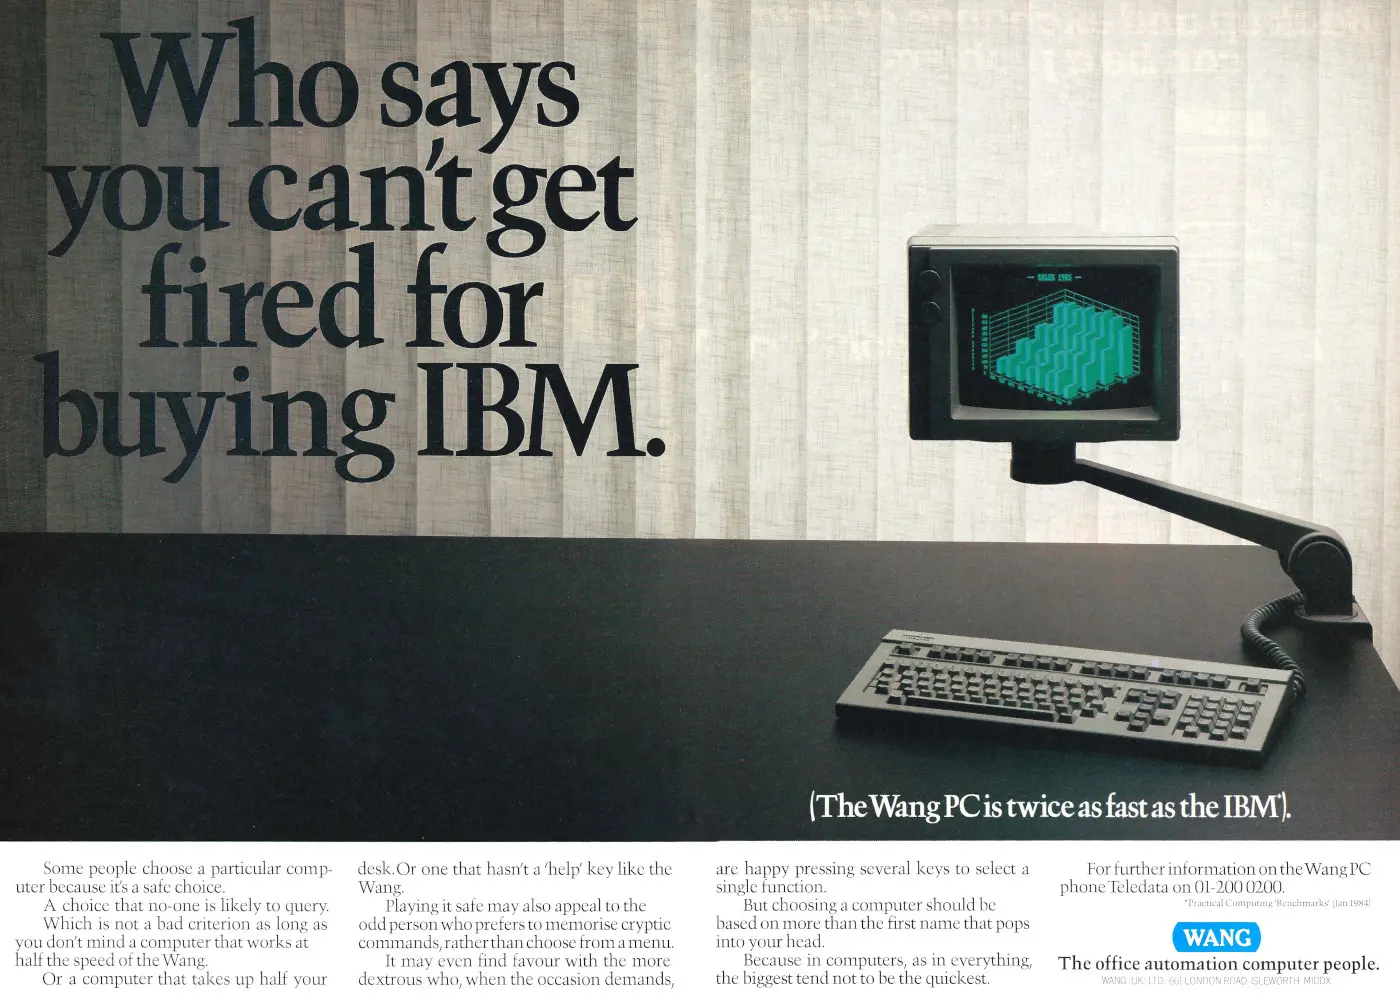 Wang Advert: Who says you can't get fired for buying IBM?, from Personal Computer World, April 1985